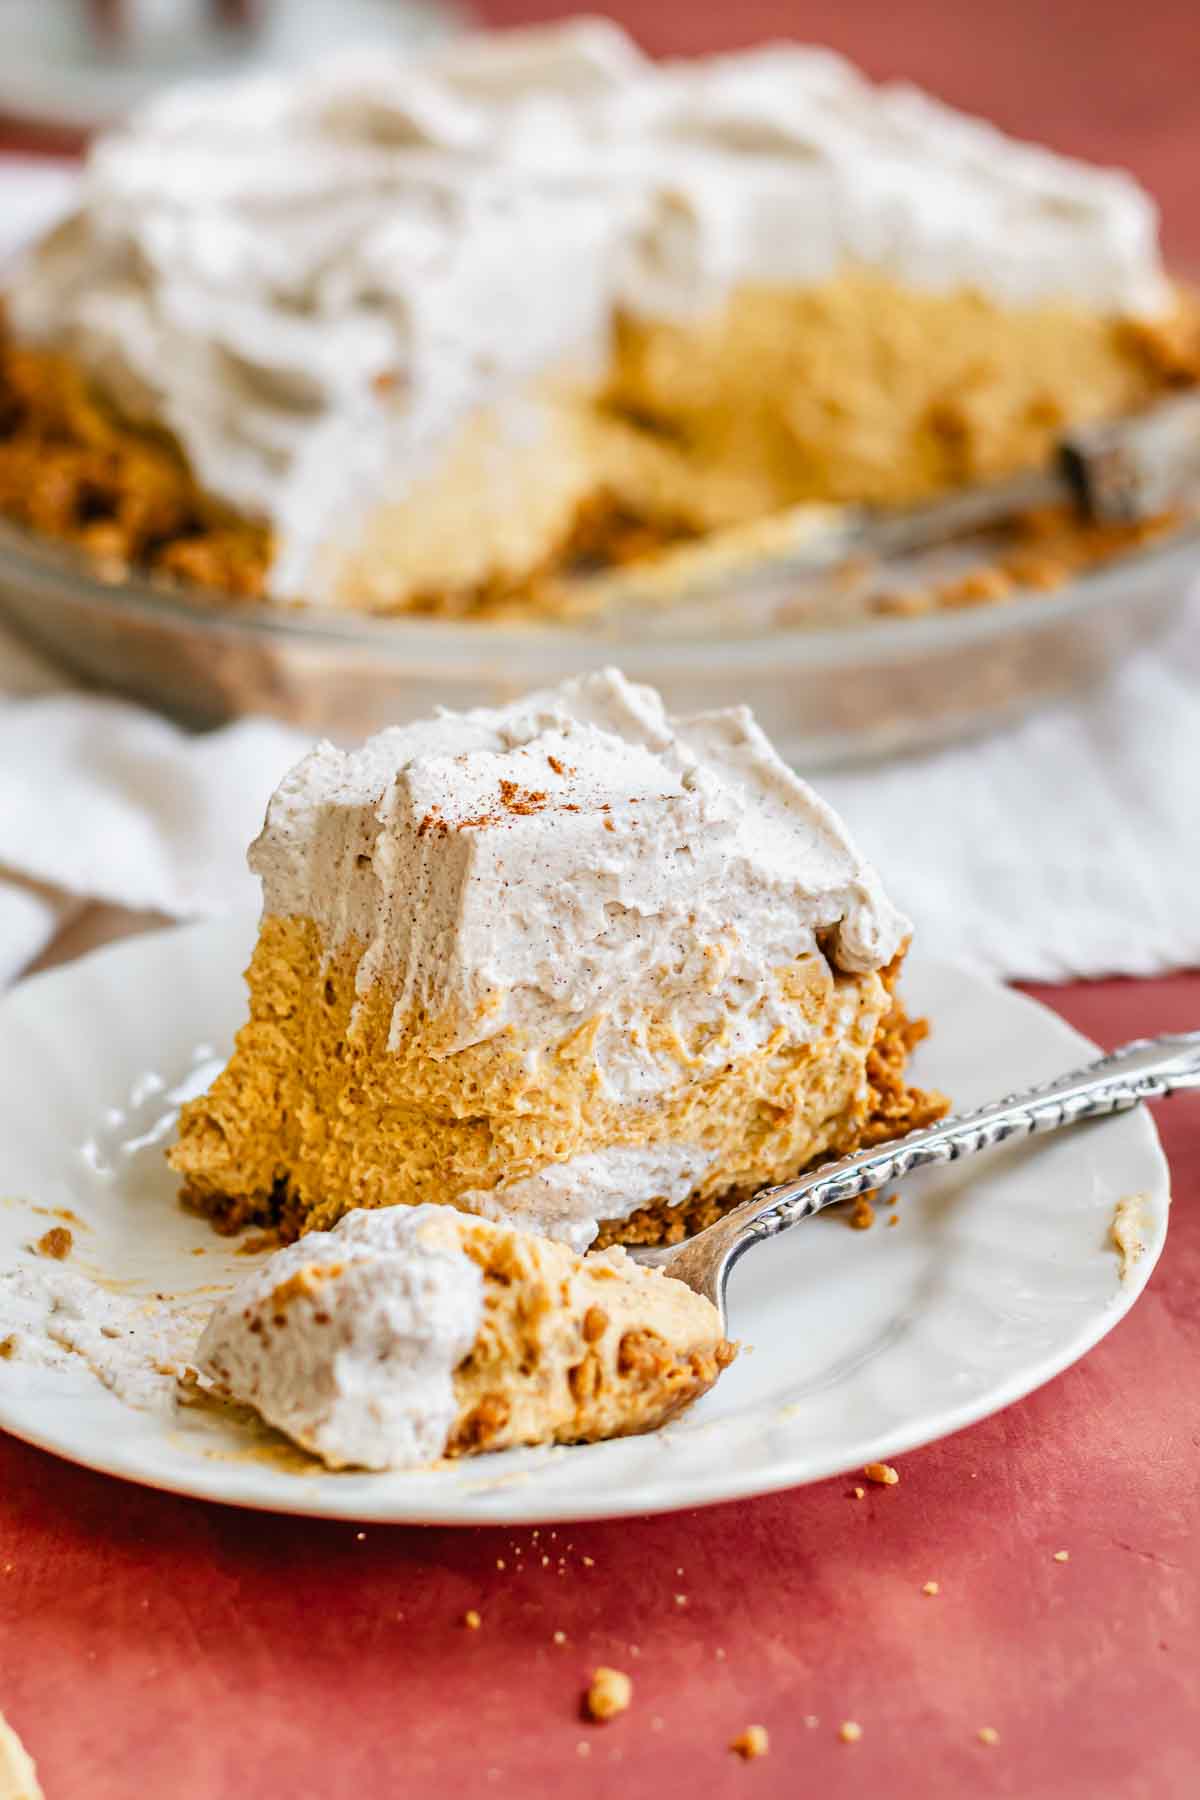 A slice of pumpkin mousse pie on a plate. A fork holds a bite.